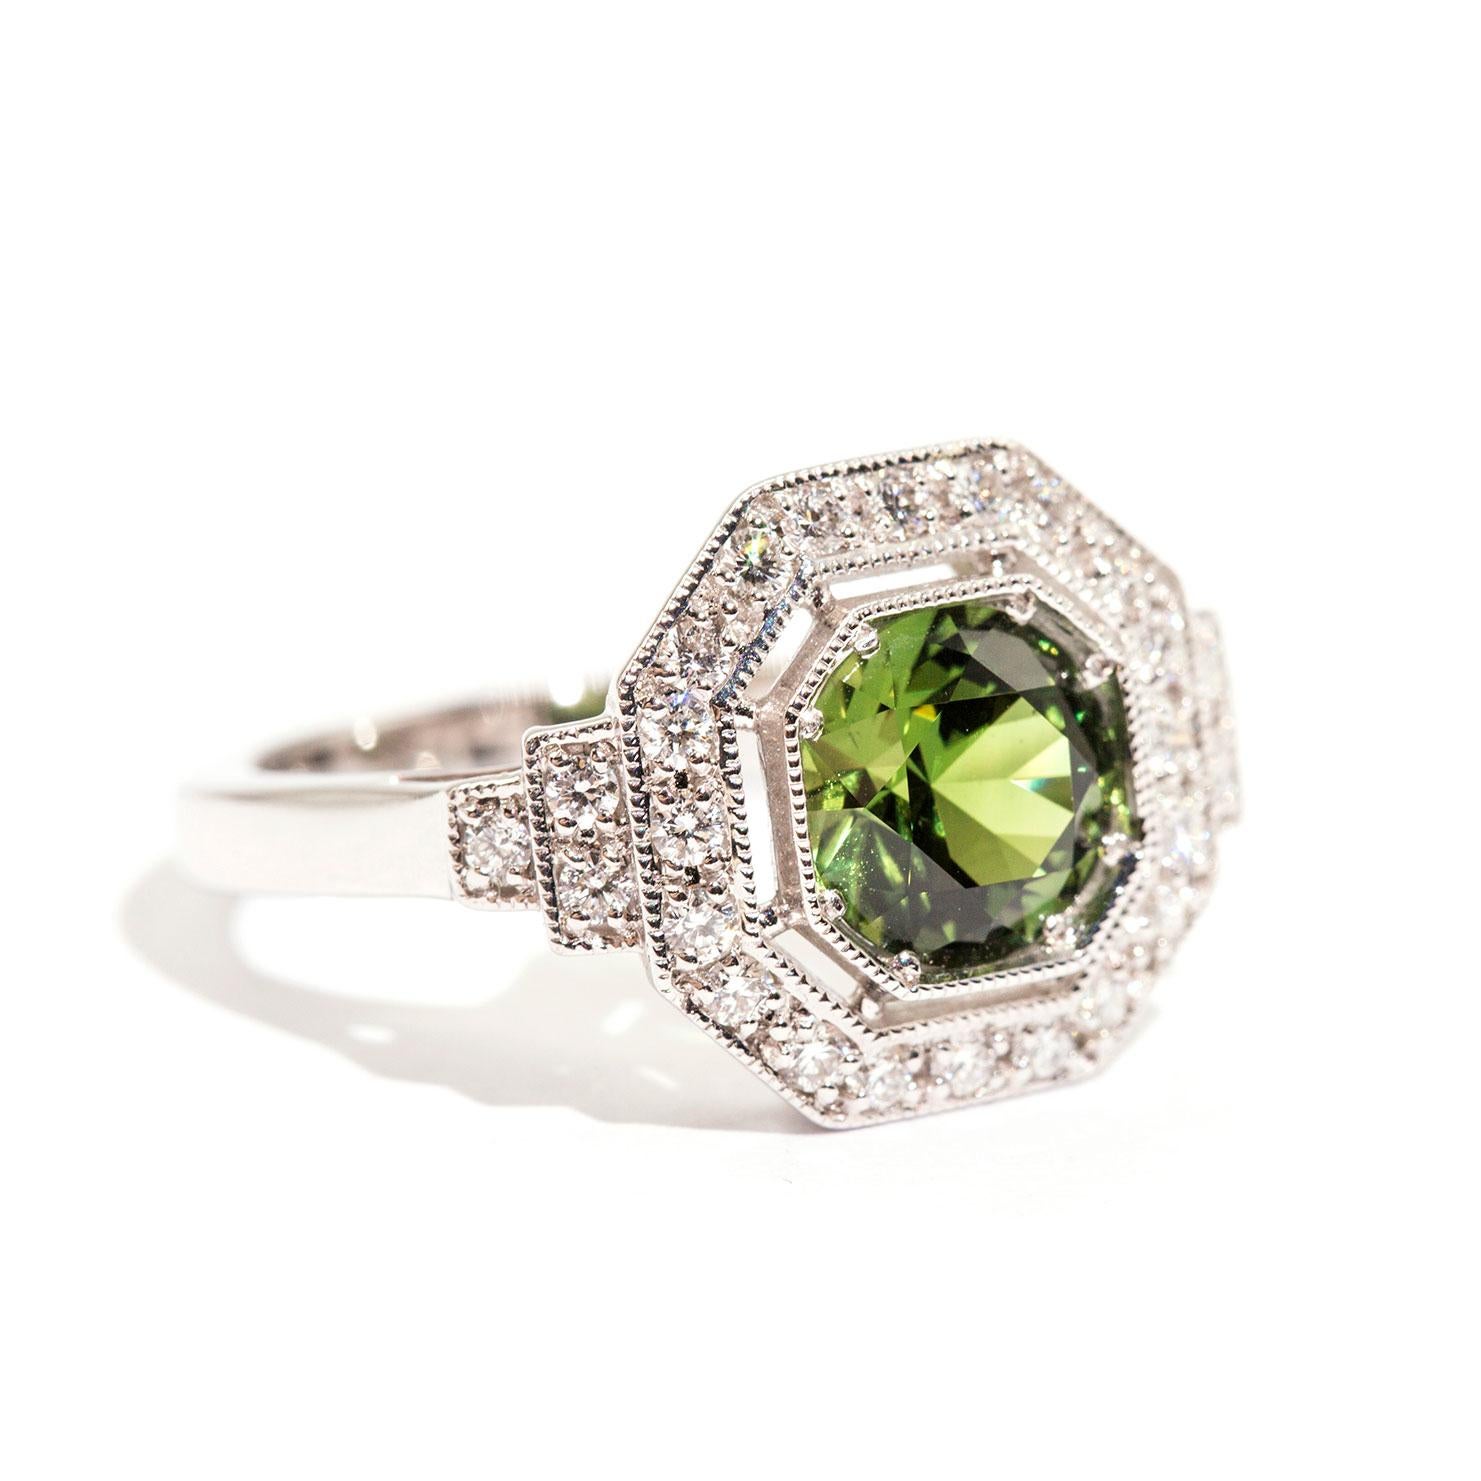 Forged in 18 carat white gold, this breathtaking art deco inspired ring features a captivating 1.71 carat bright green round natural sapphire with a gorgeous hexagonal border of shimmering round brilliant diamonds and six further round brilliant